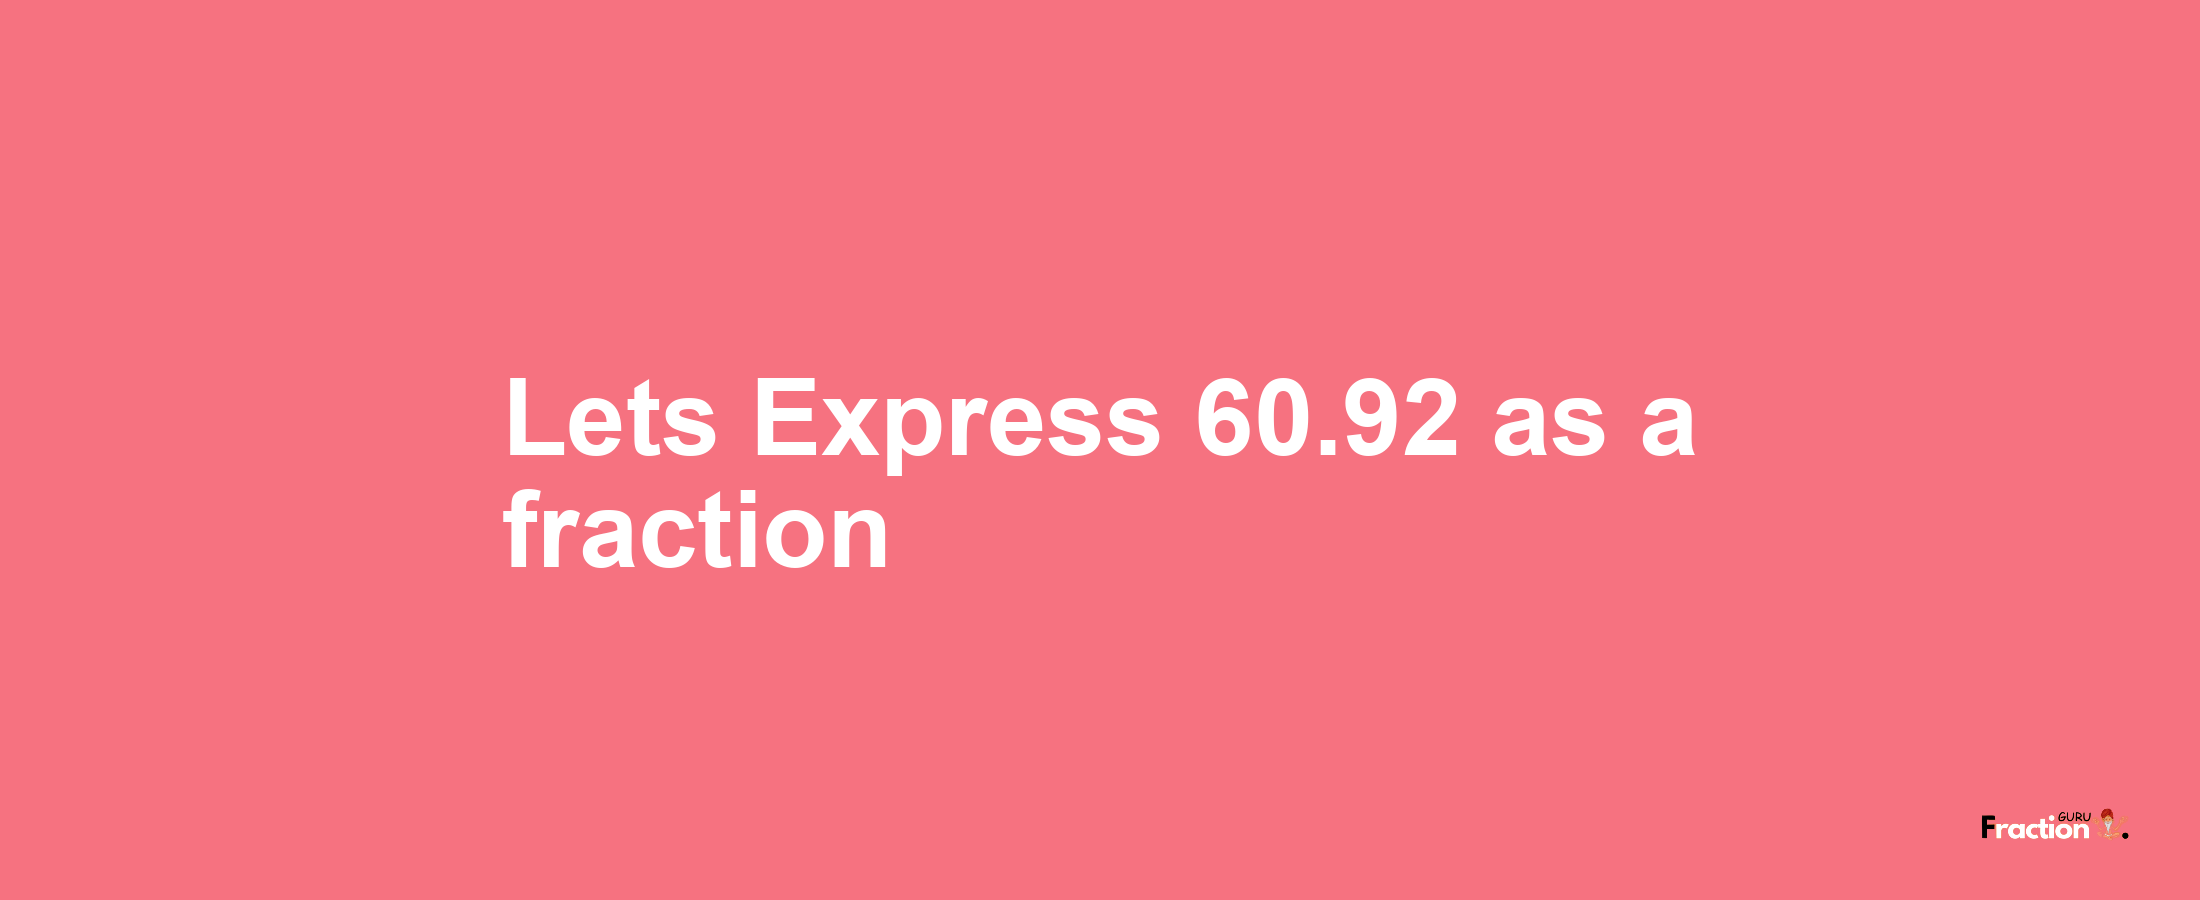 Lets Express 60.92 as afraction